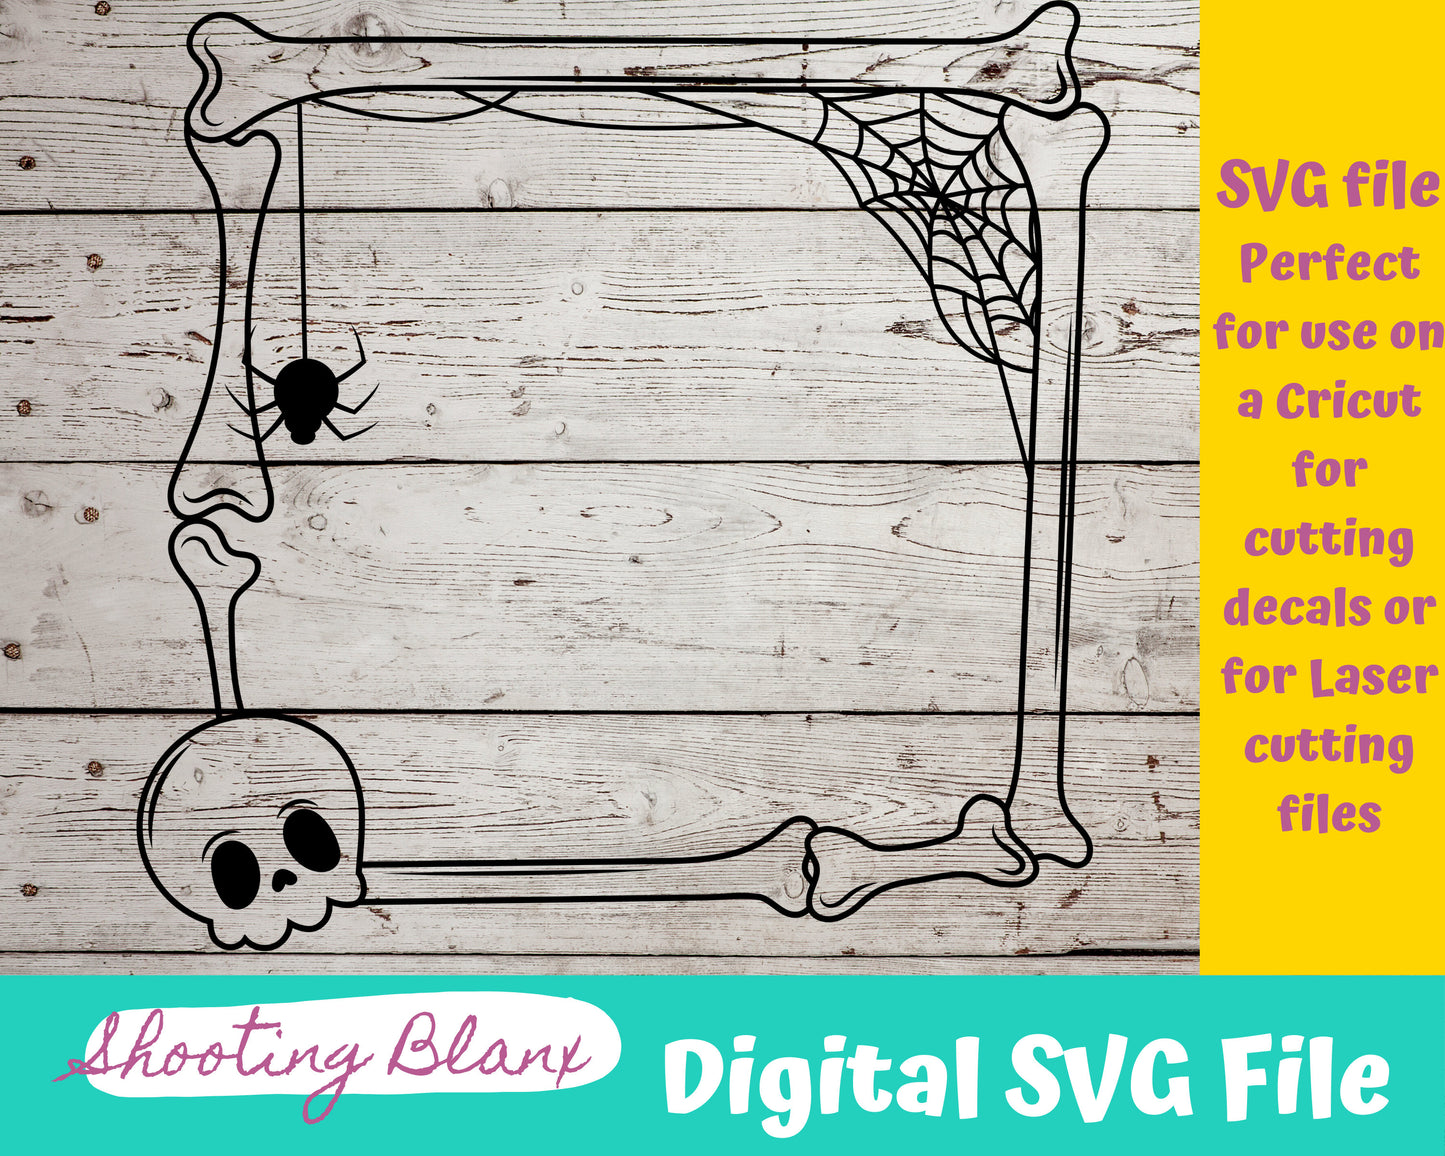 Halloween Square Bone Skeleton Frame bundle SVG files perfect for Cricut, Cameo, or Silhouette also for laser engraving Glowforge, horror